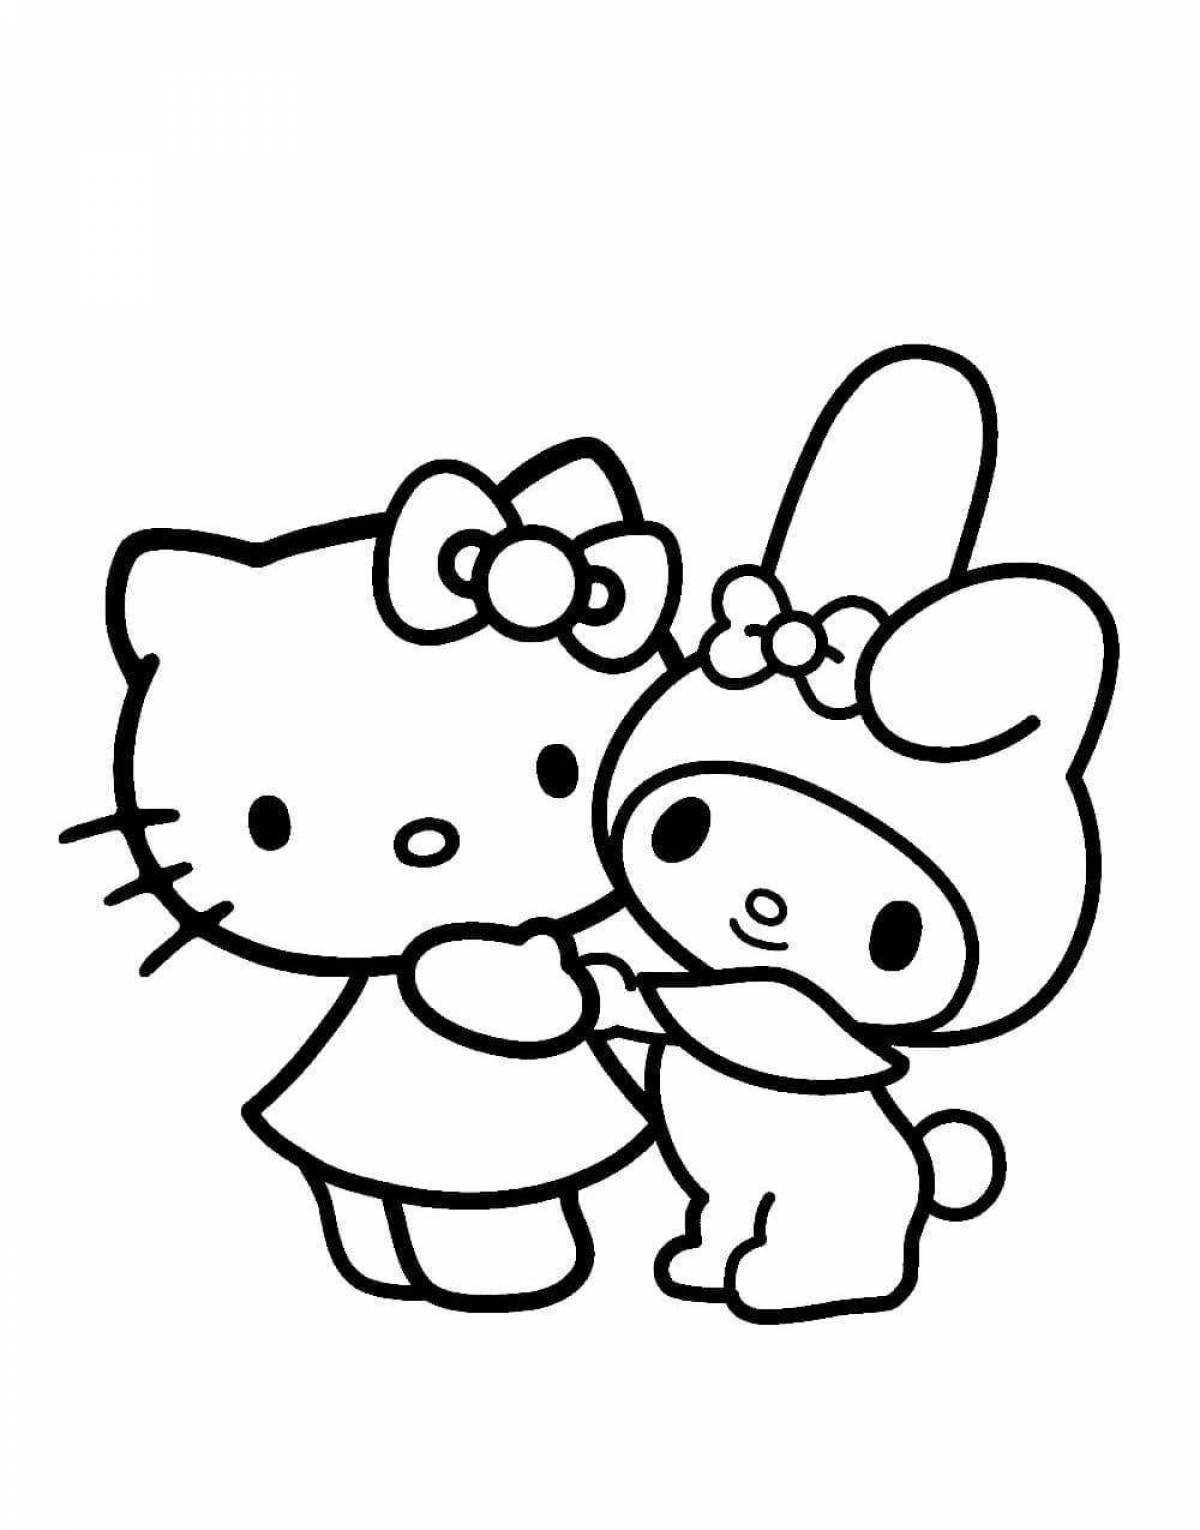 Violent chickens hello kitty coloring book